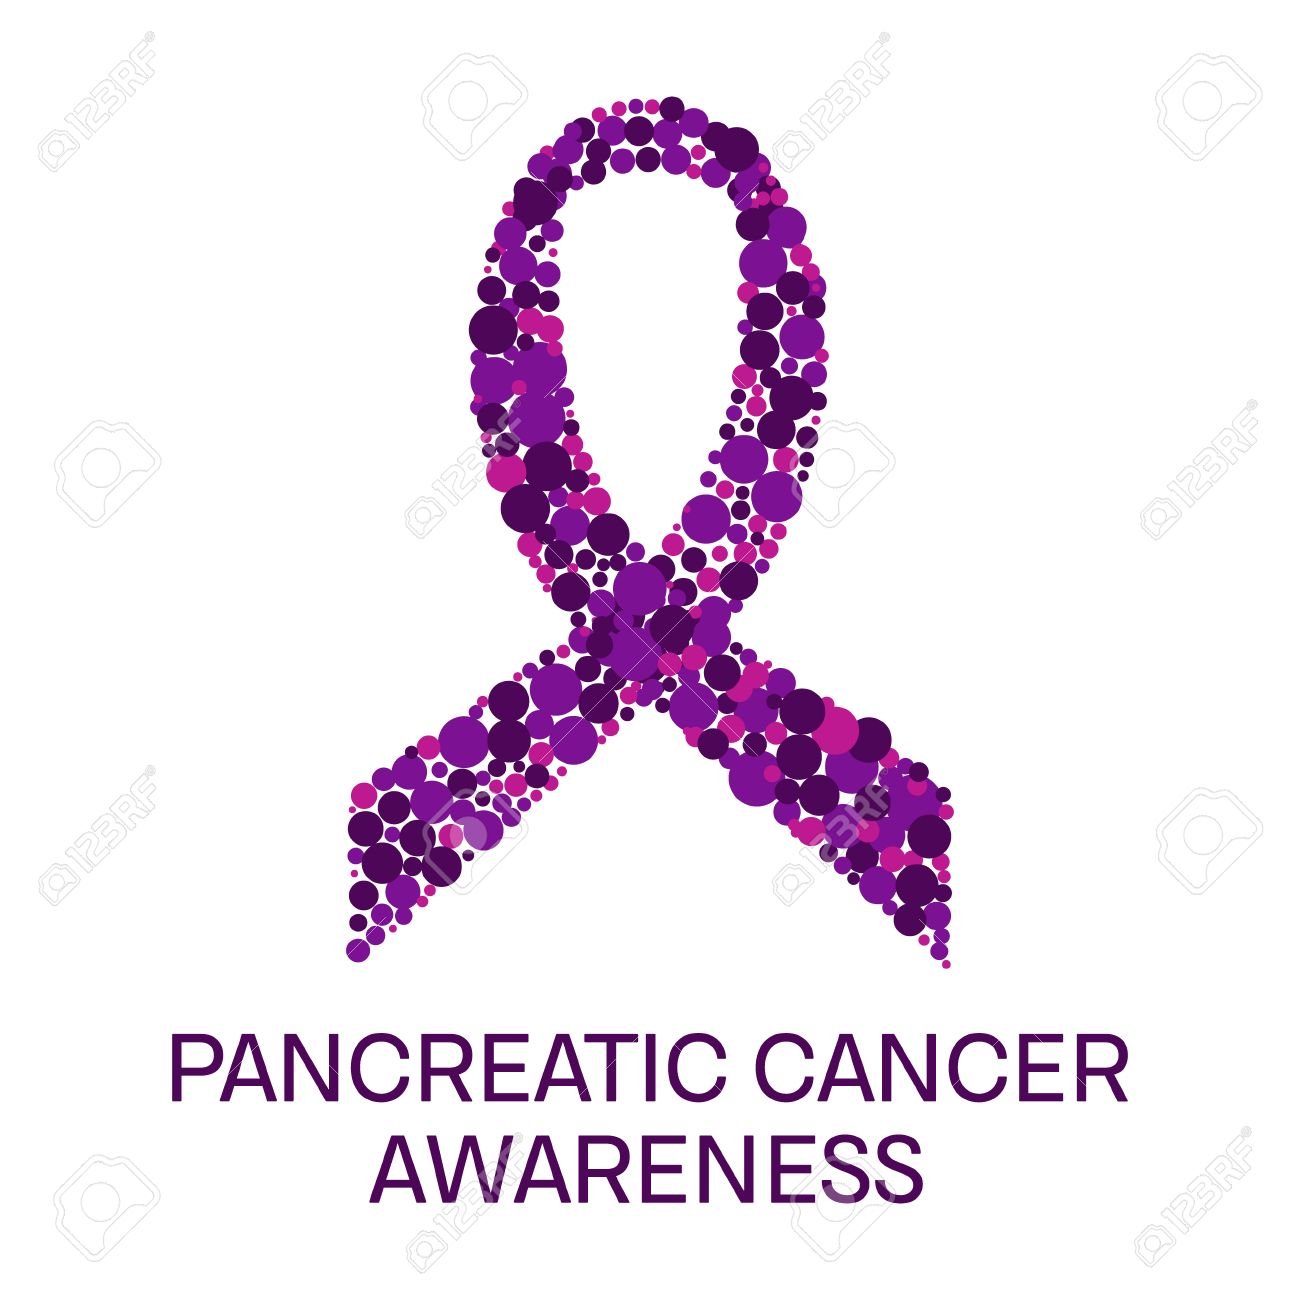 This is a page to promote the awareness of pancreatic cancer, as the title states. I will be engaging in the online communities of patients and supporters.